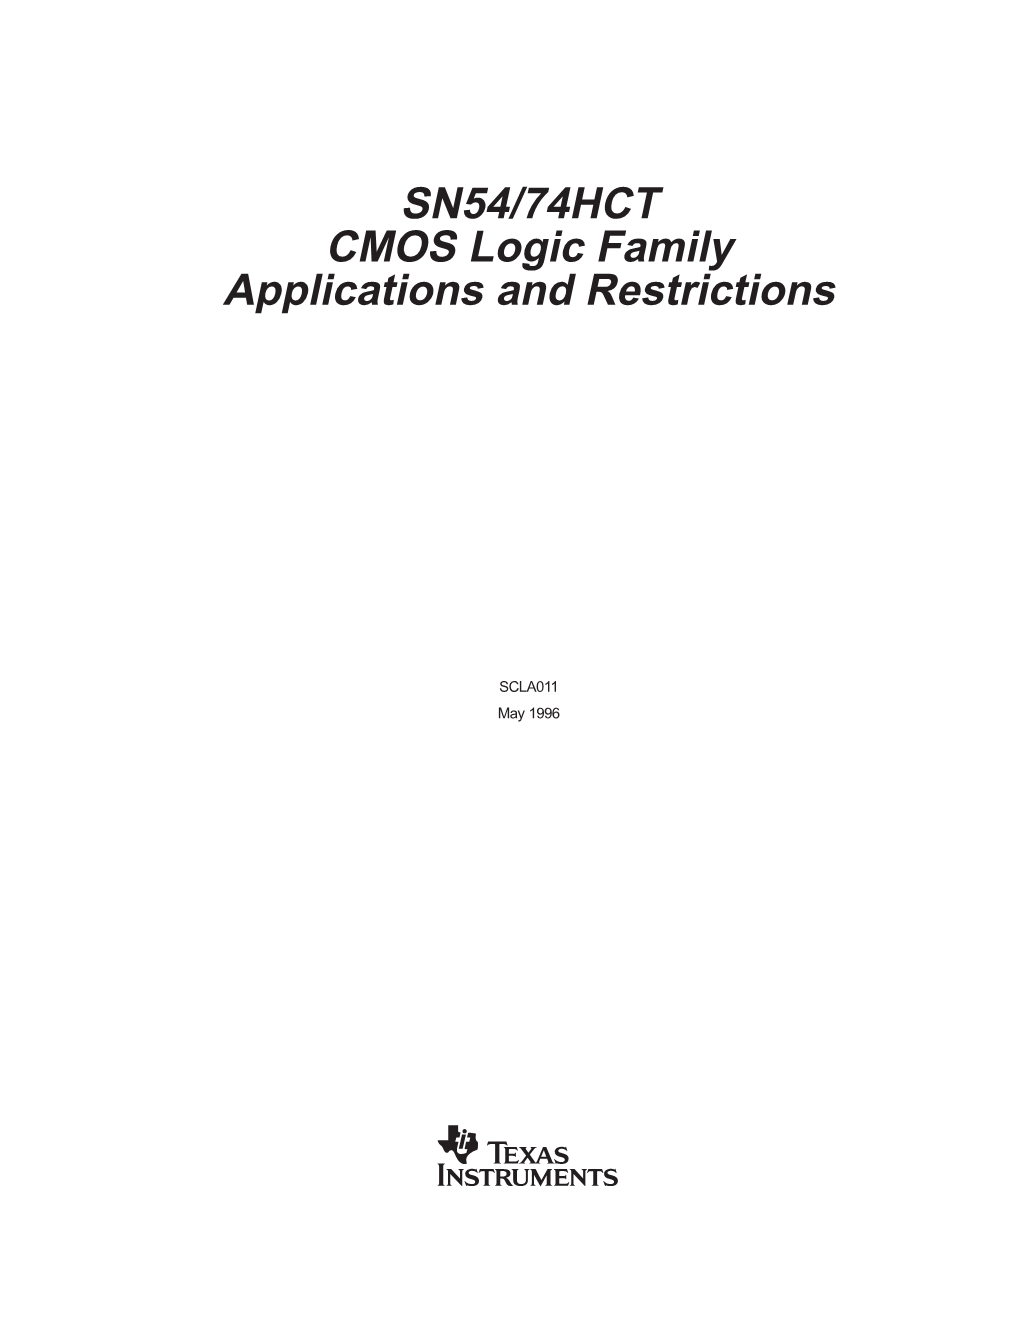 SN54/74HCT CMOS Logic Family Applications and Restrictions